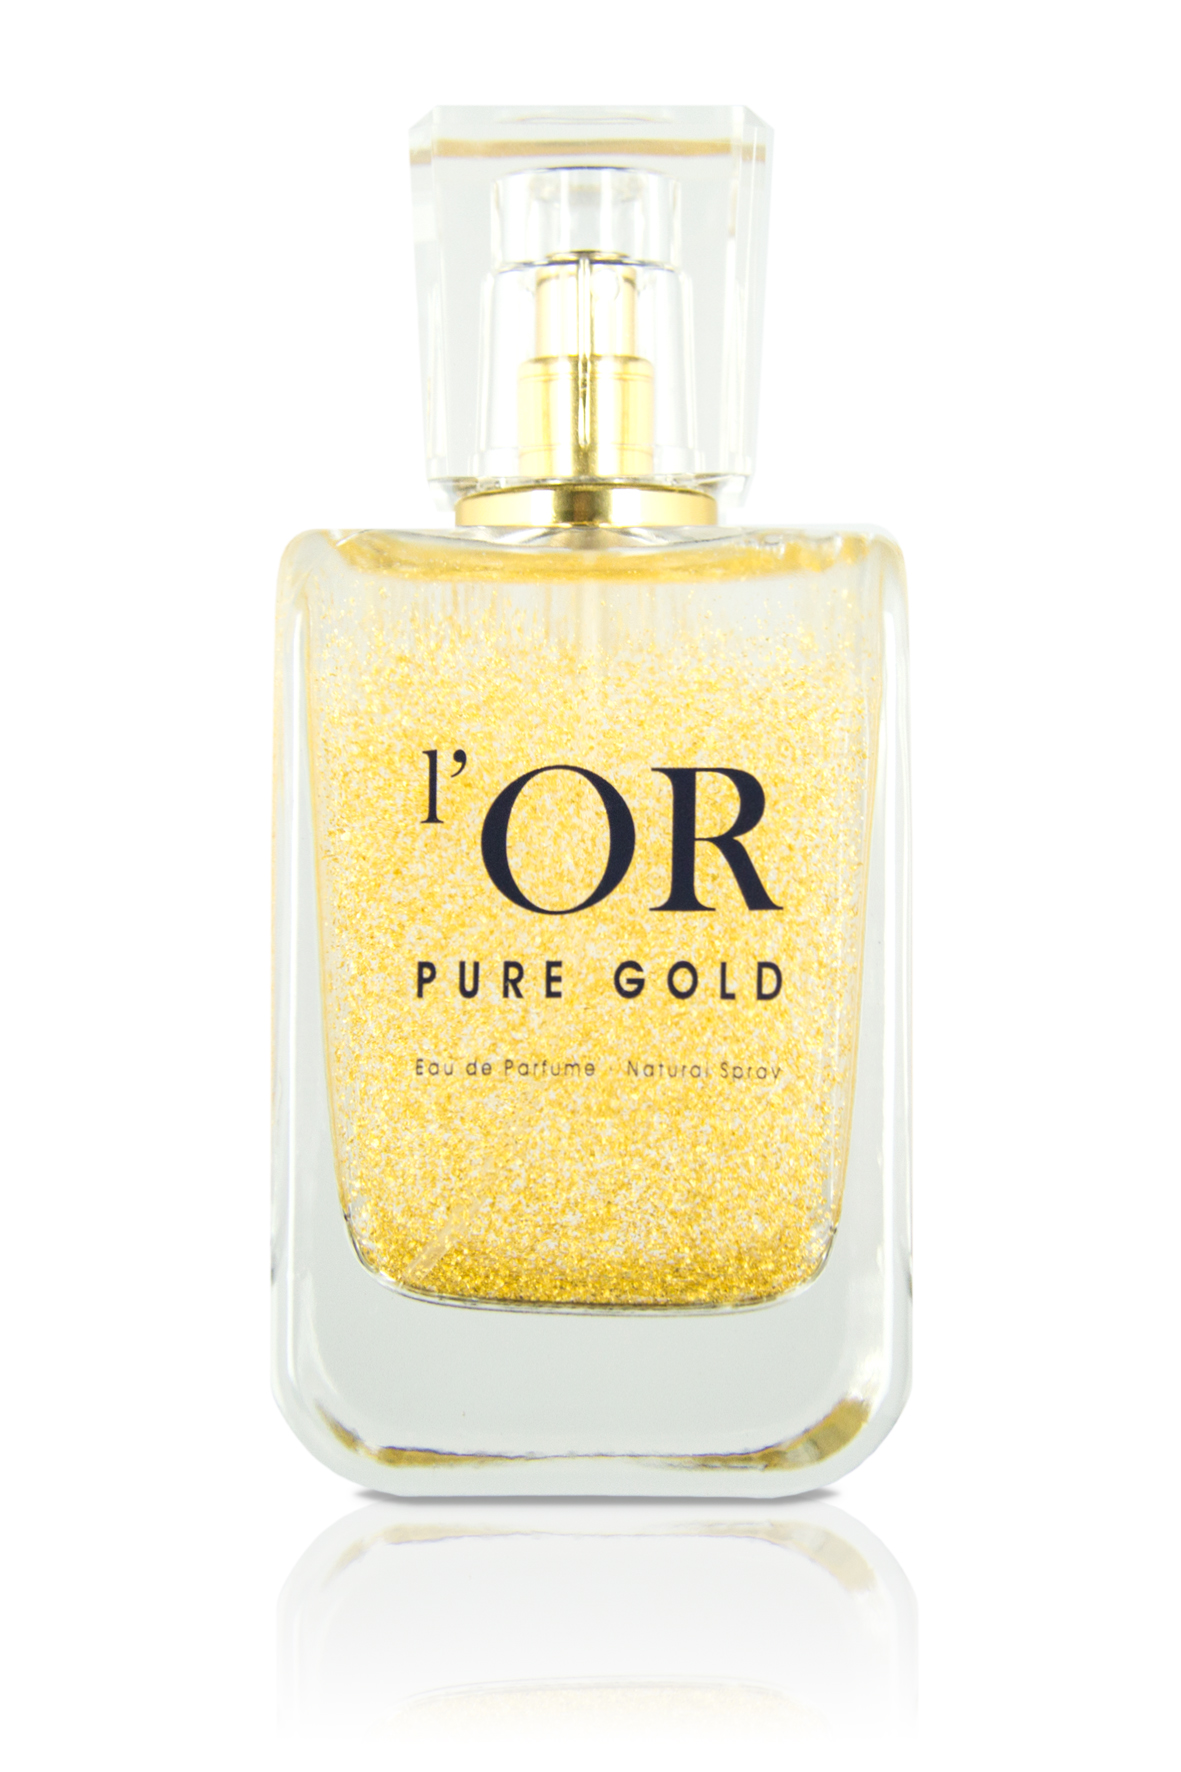 961-mbr-medical-beauty-research-pure-gold